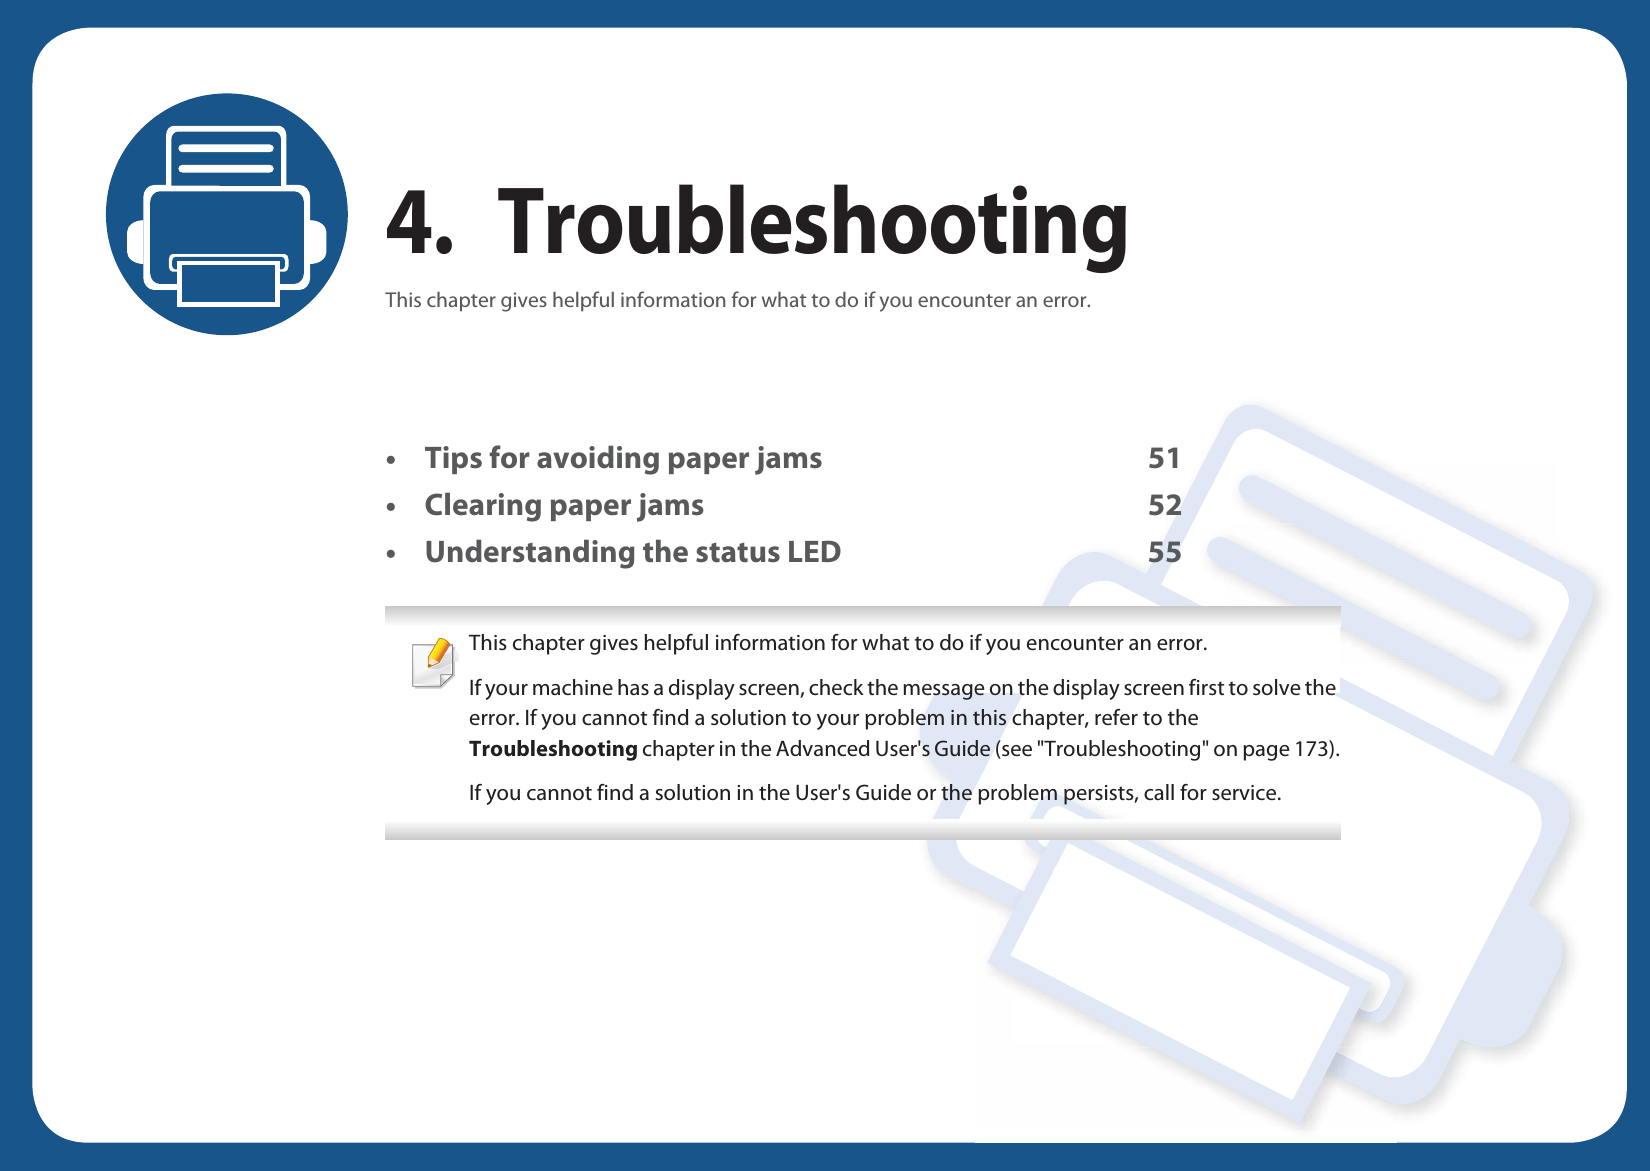 4. TroubleshootingThis chapter gives helpful information for what to do if you encounter an error.• Tips for avoiding paper jams 51• Clearing paper jams 52• Understanding the status LED 55 This chapter gives helpful information for what to do if you encounter an error.If your machine has a display screen, check the message on the display screen first to solve the error. If you cannot find a solution to your problem in this chapter, refer to the Troubleshooting chapter in the Advanced User&apos;s Guide (see &quot;Troubleshooting&quot; on page 173).If you cannot find a solution in the User&apos;s Guide or the problem persists, call for service.  